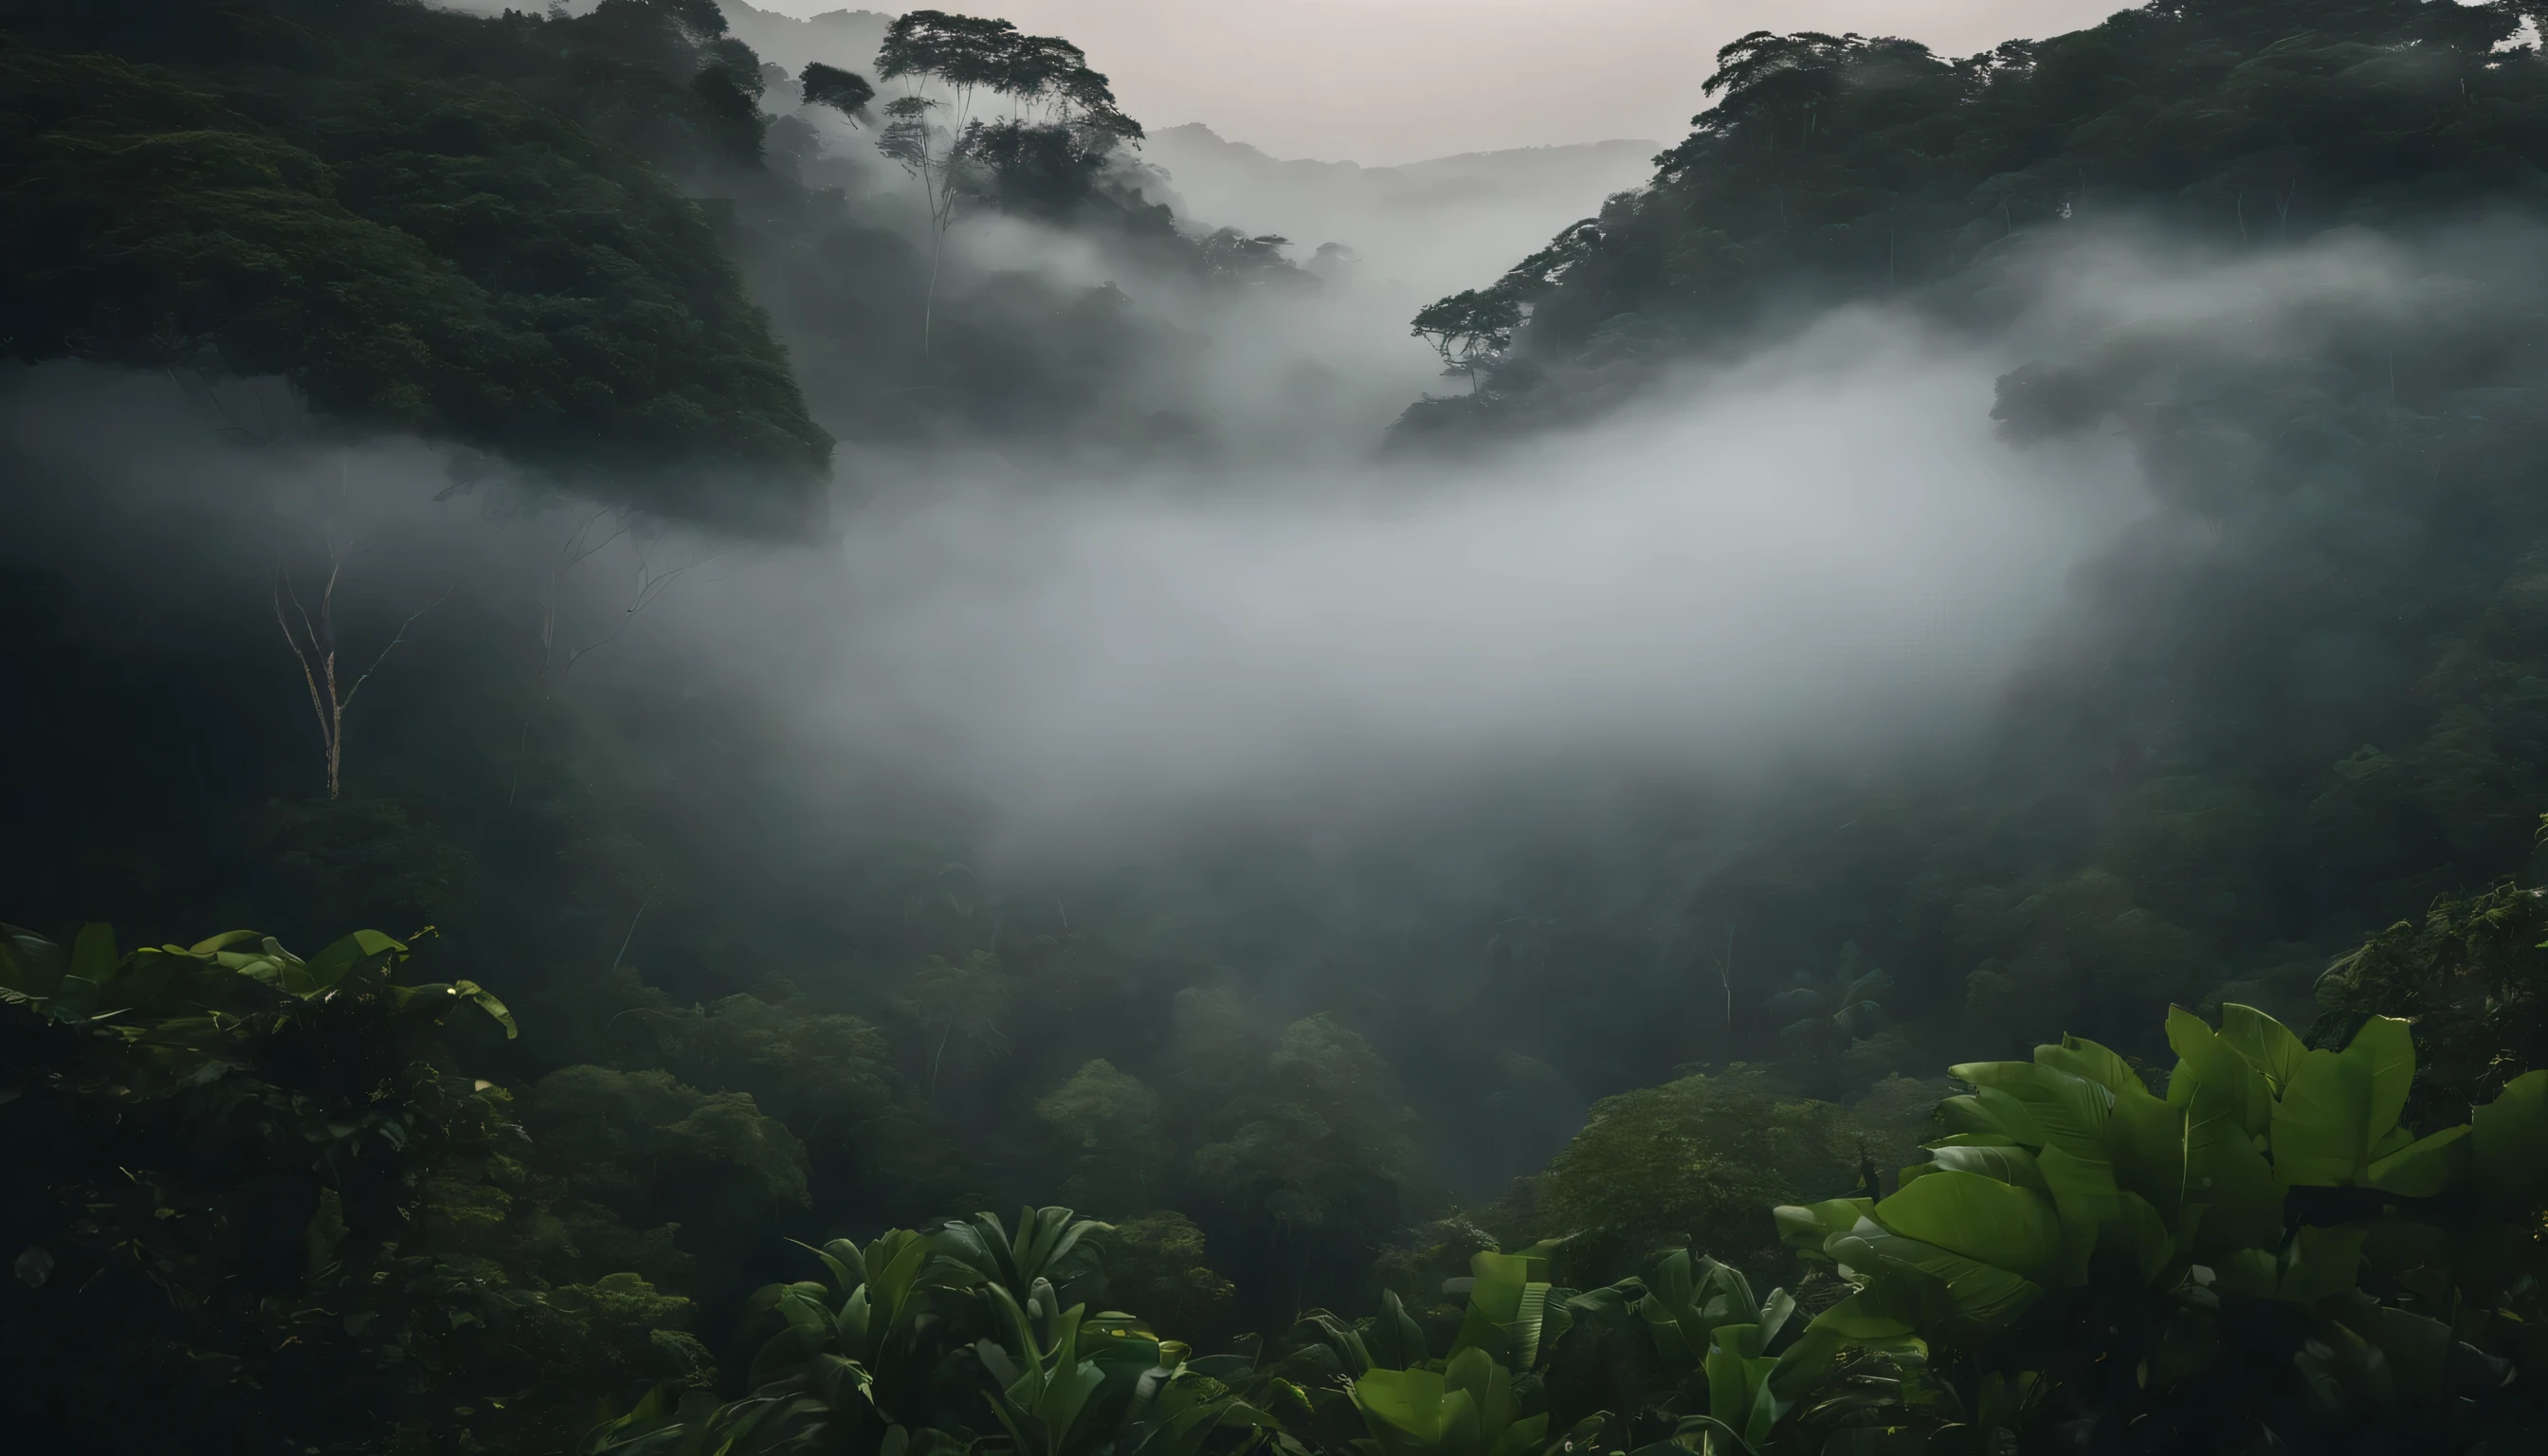 Landscape jungle cinematic drone shot scene with mist and fog covering the trees